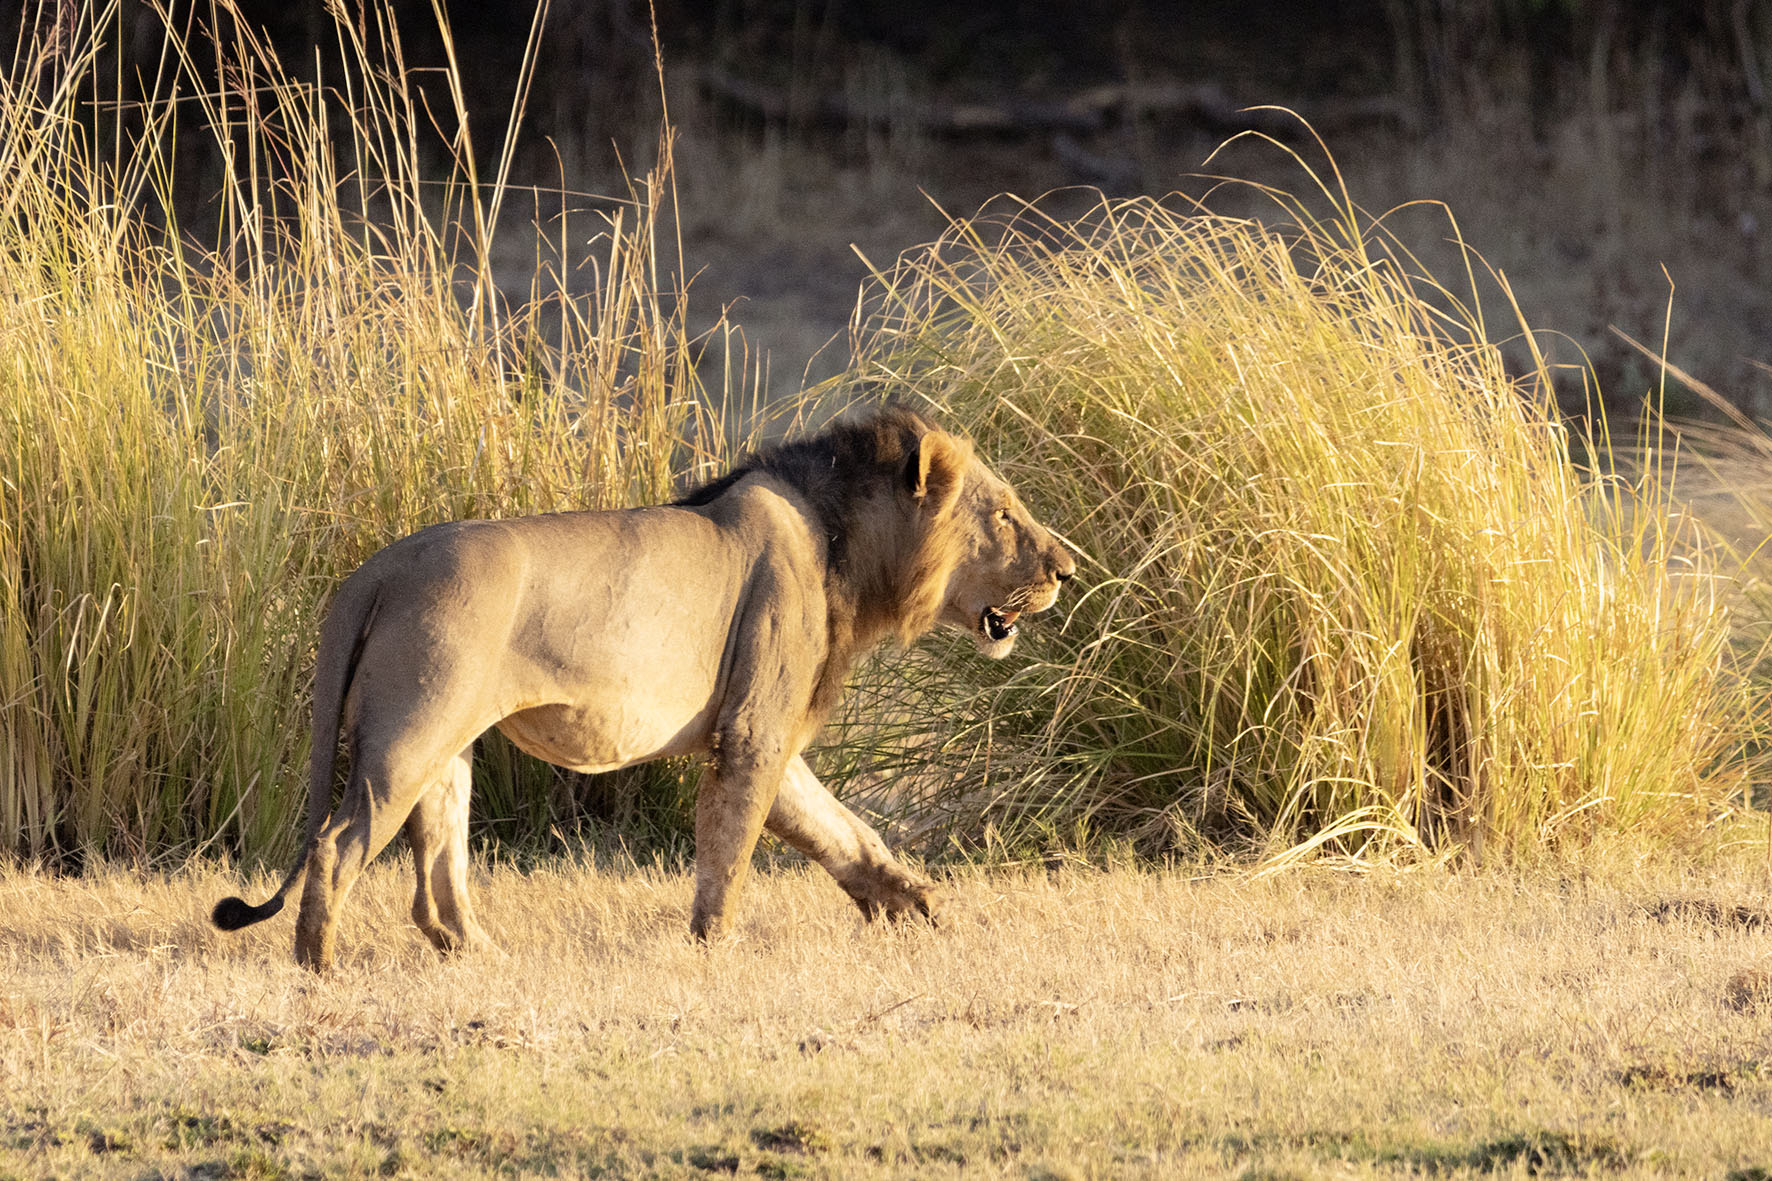 A male lion spotted roaming near the Mana Pools